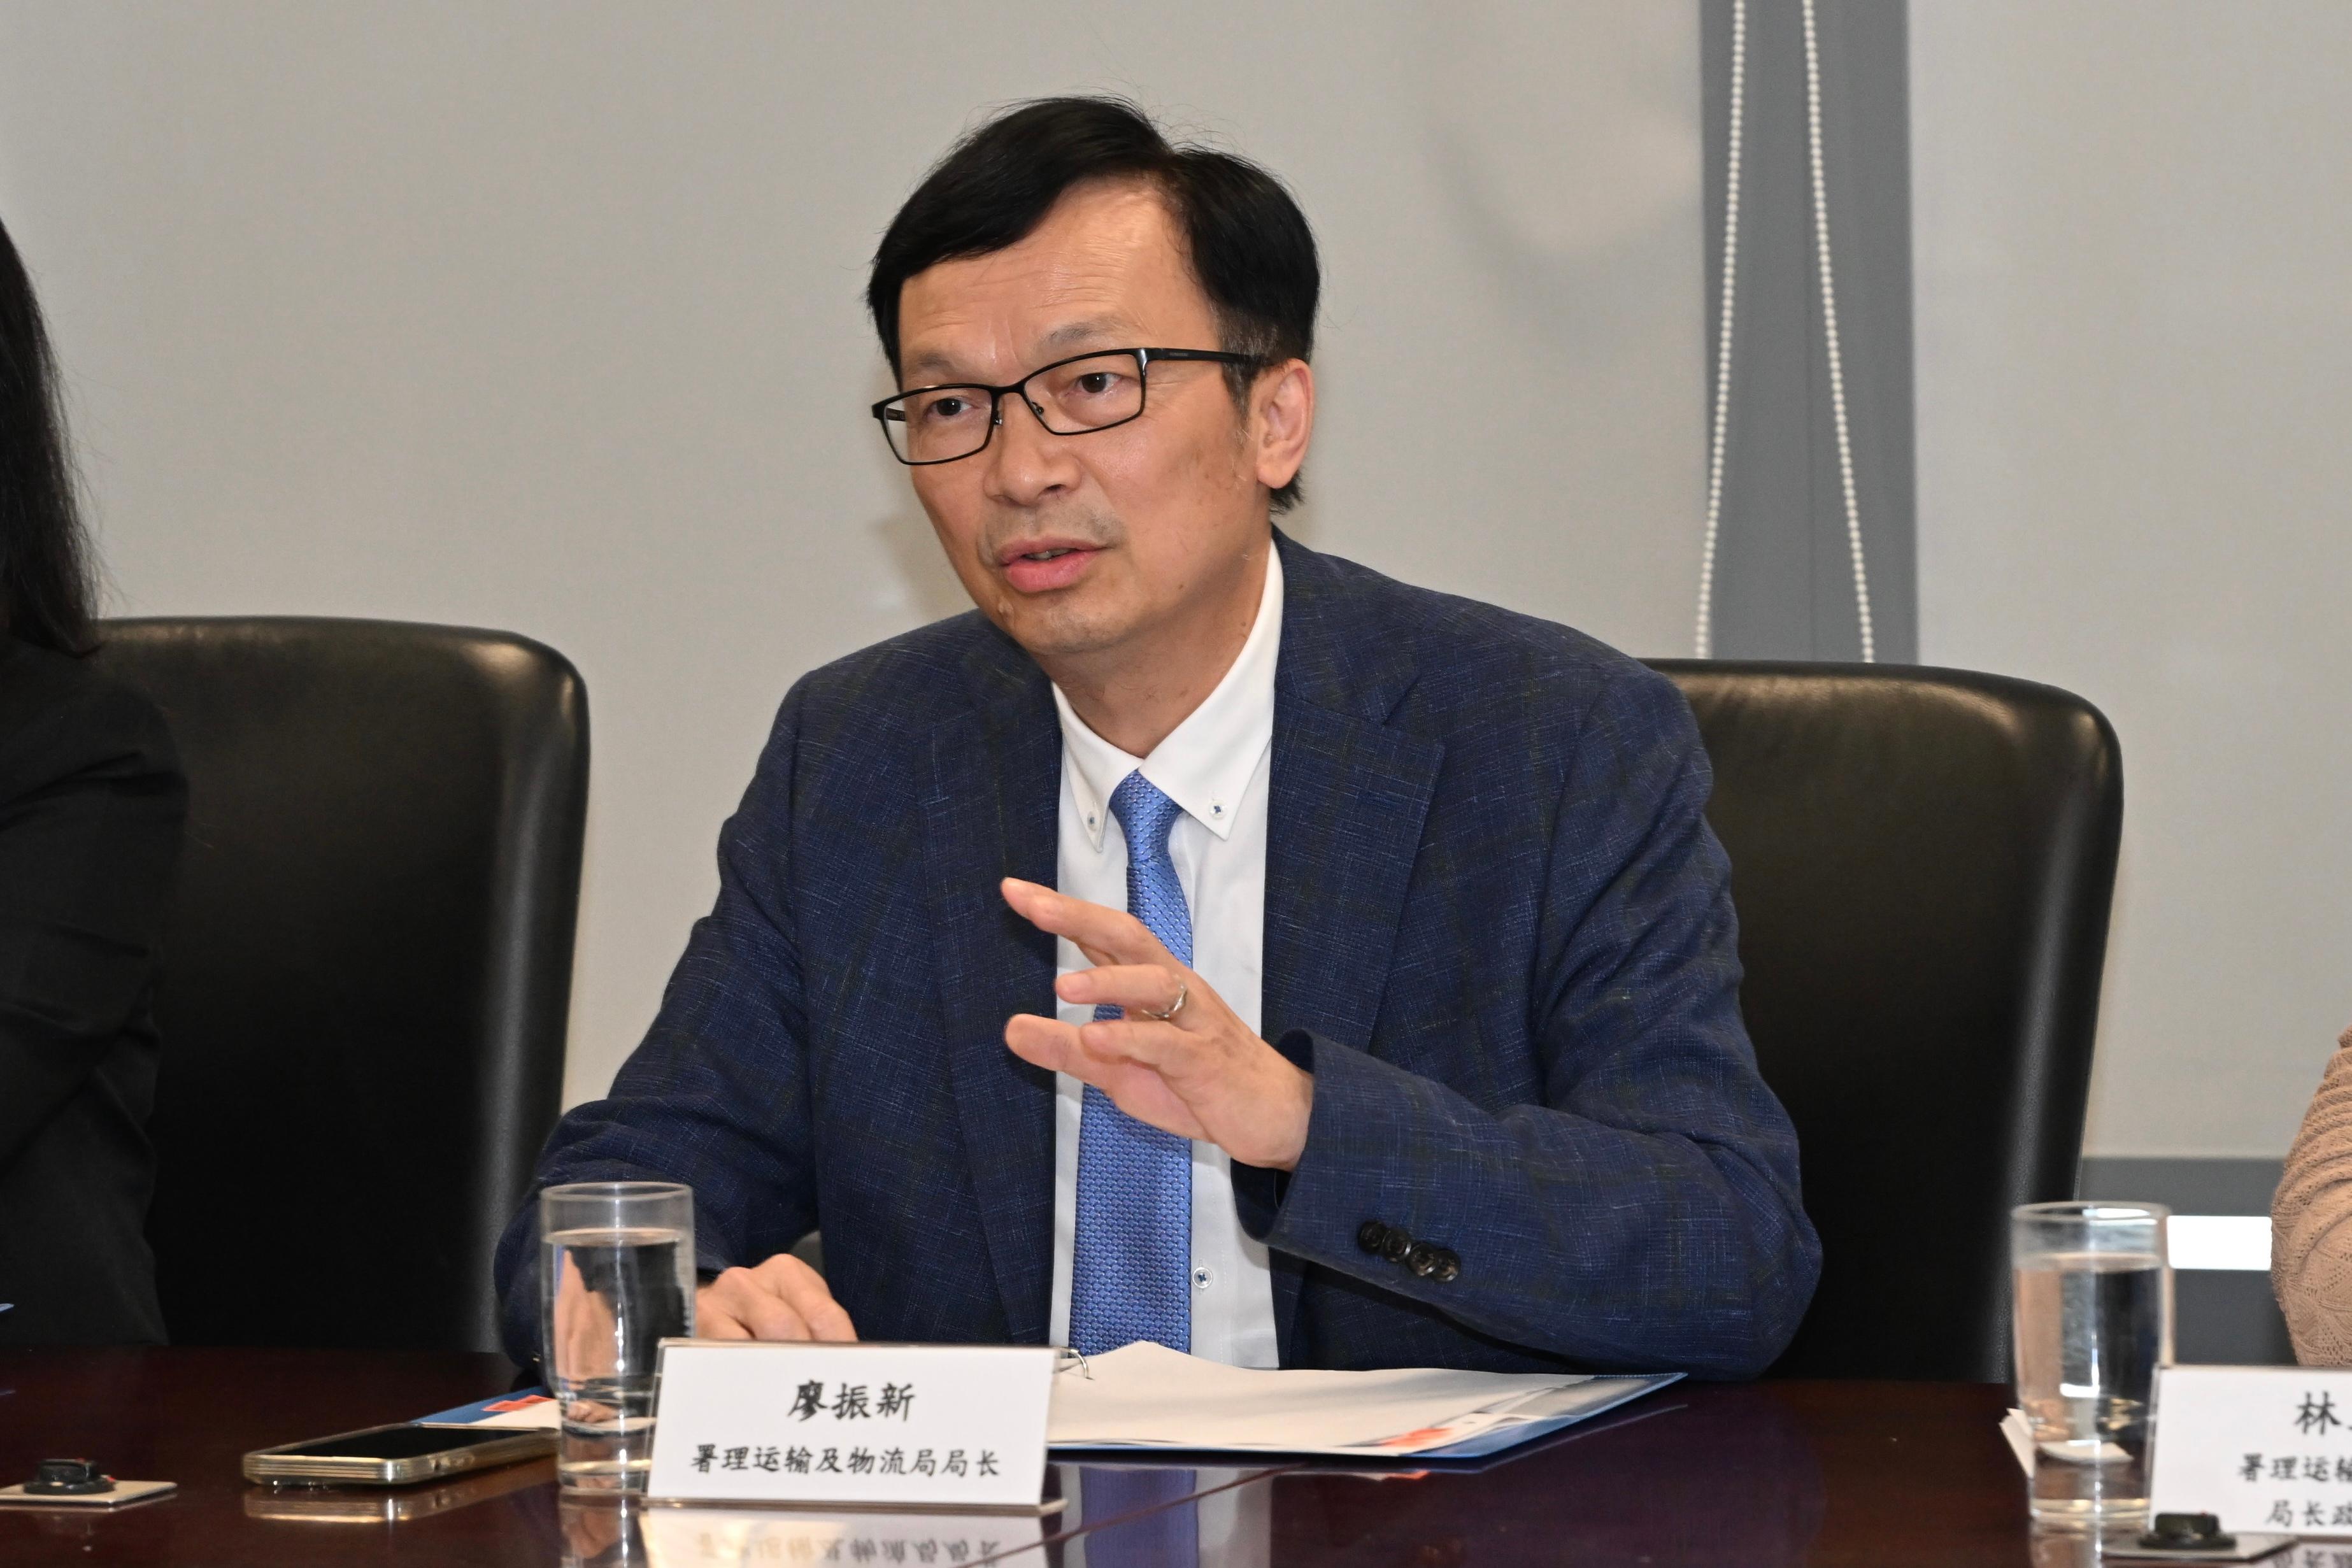 The Acting Secretary for Transport and Logistics, Mr Liu Chun-san, met the Mayor of the Zhuhai Municipal Government, Mr Huang Zhihao, today (May 19). Photo shows Mr Liu speaking at the meeting.